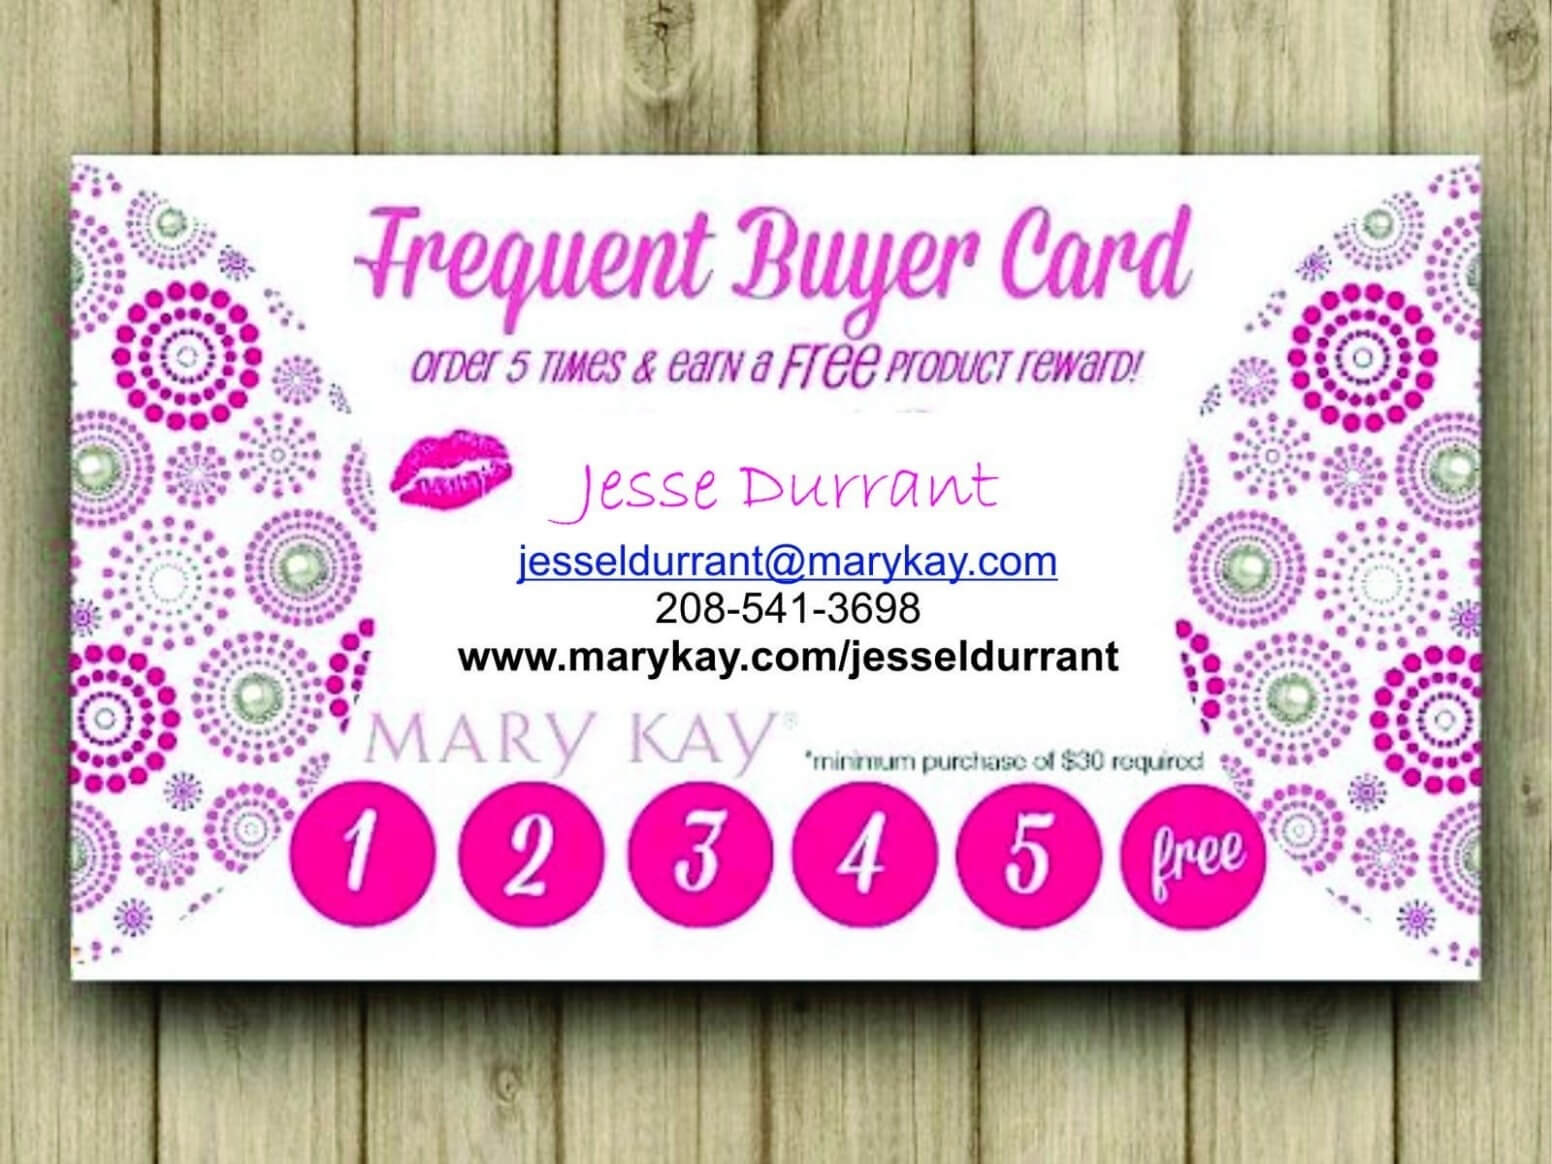 Mary Kay Business Cards | Business Cards Pertaining To Mary Kay Business Cards Templates Free